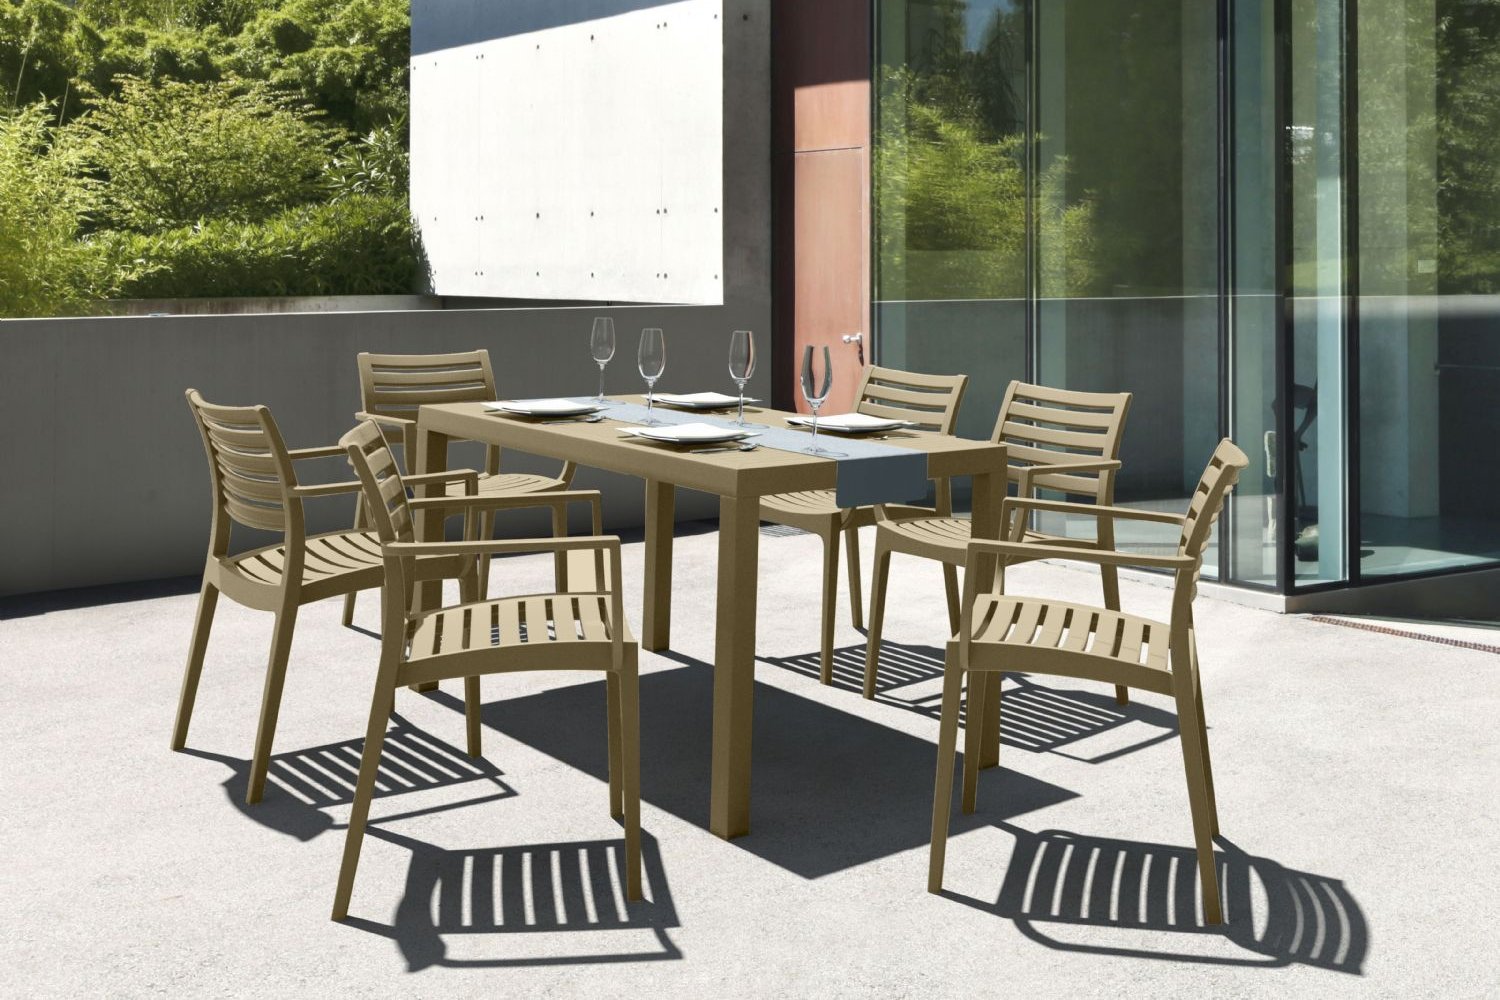 Artemis Resin Rectangle Outdoor Dining Set 7 Piece with Arm Chairs Black ISP1862S-BLA - 6